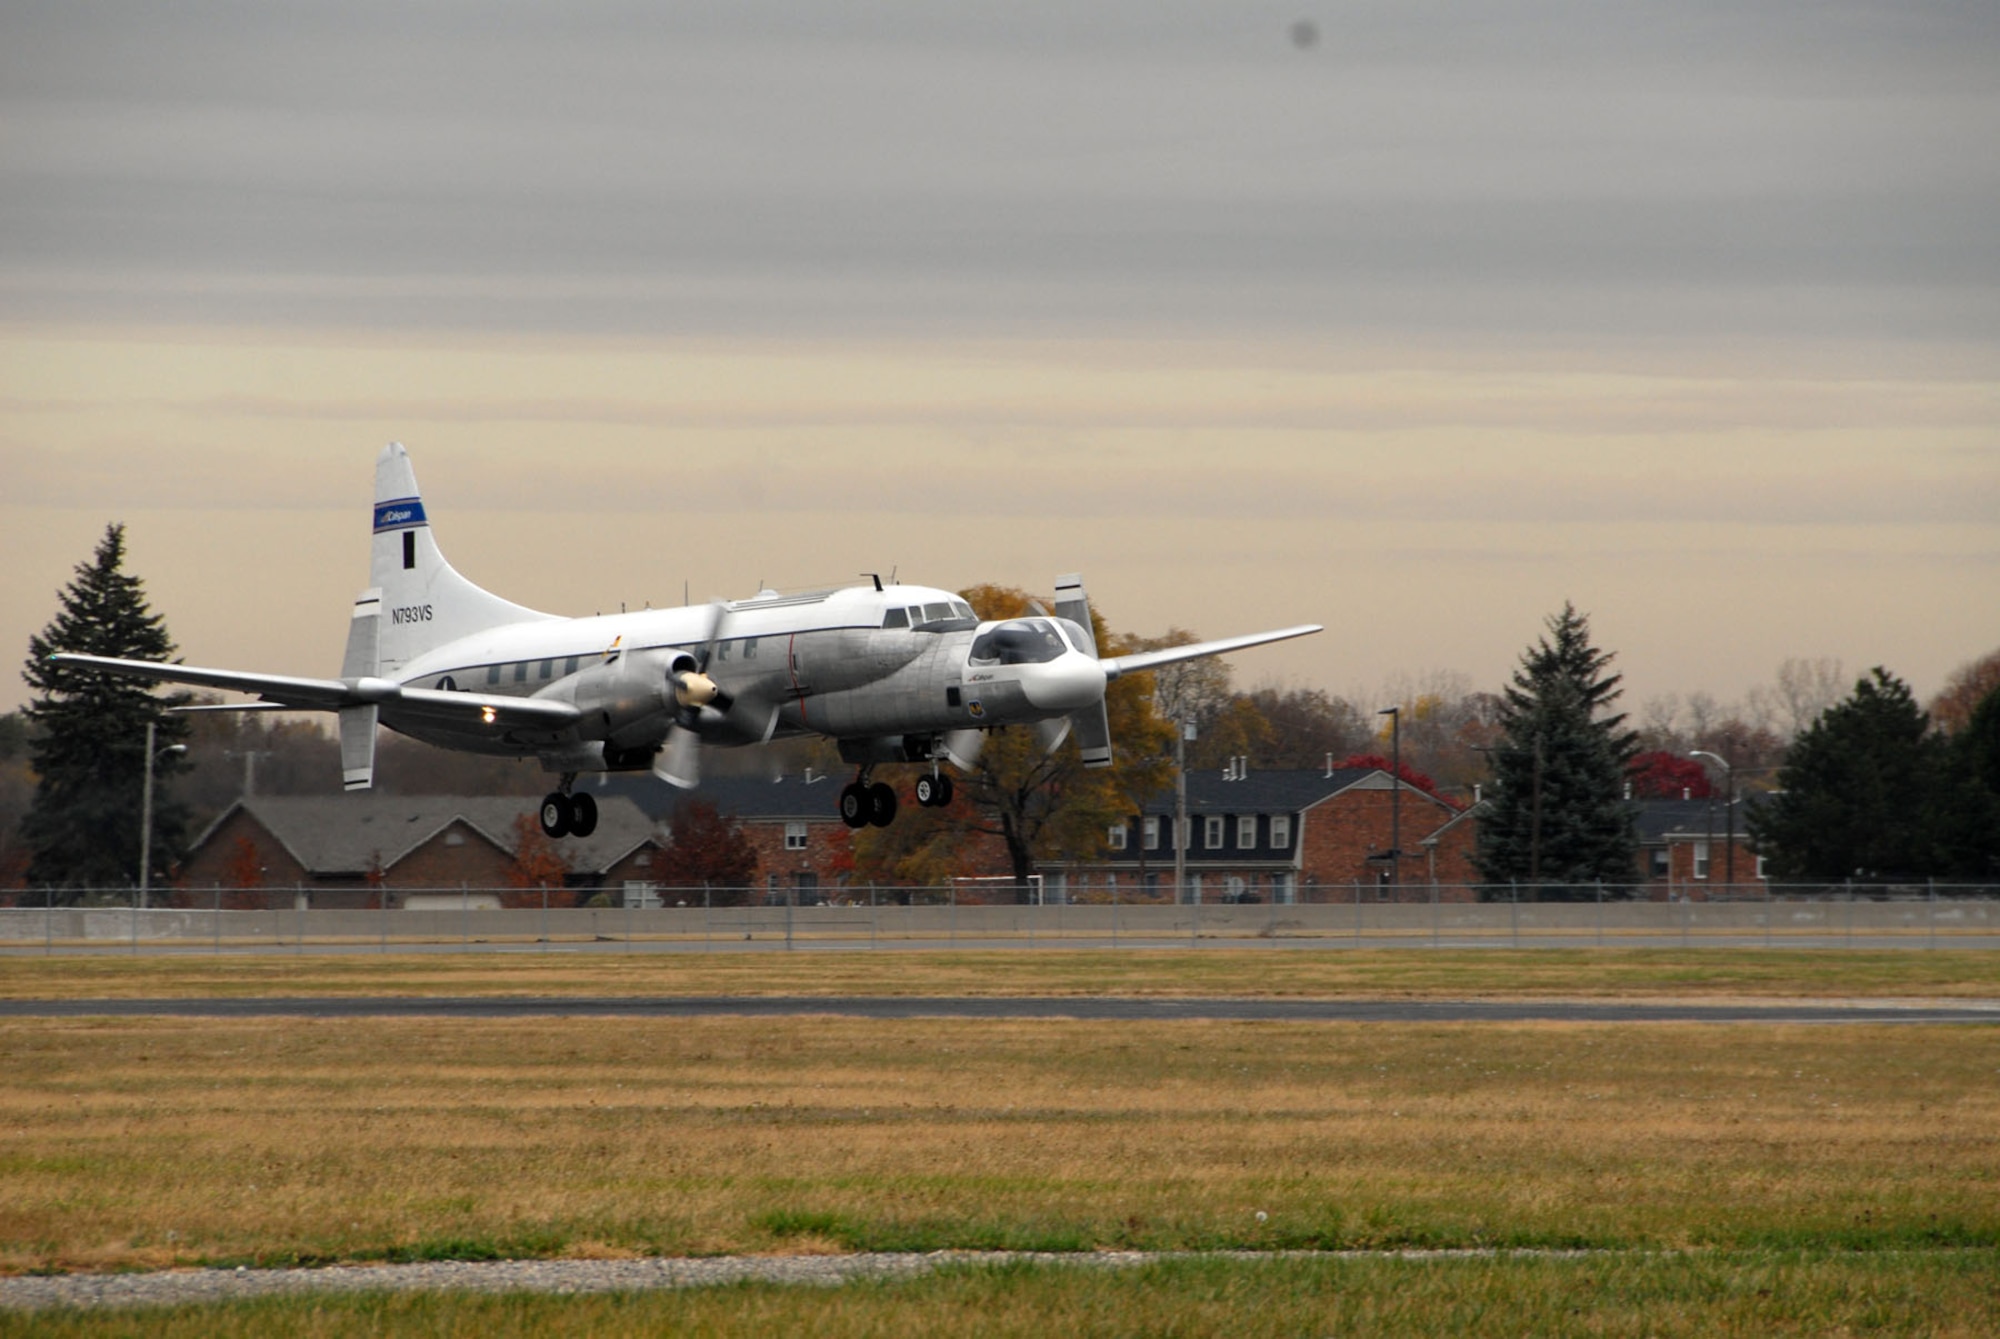 DAYTON, Ohio - The Convair NC-131H Total In-Flight Simulator (TIFS), a very unique aircraft created to perform research for the U.S. Air Force, lands on the back field of the National Museum of the U.S. Air Force on Nov. 7, 2008. (U.S. Air Force photo)